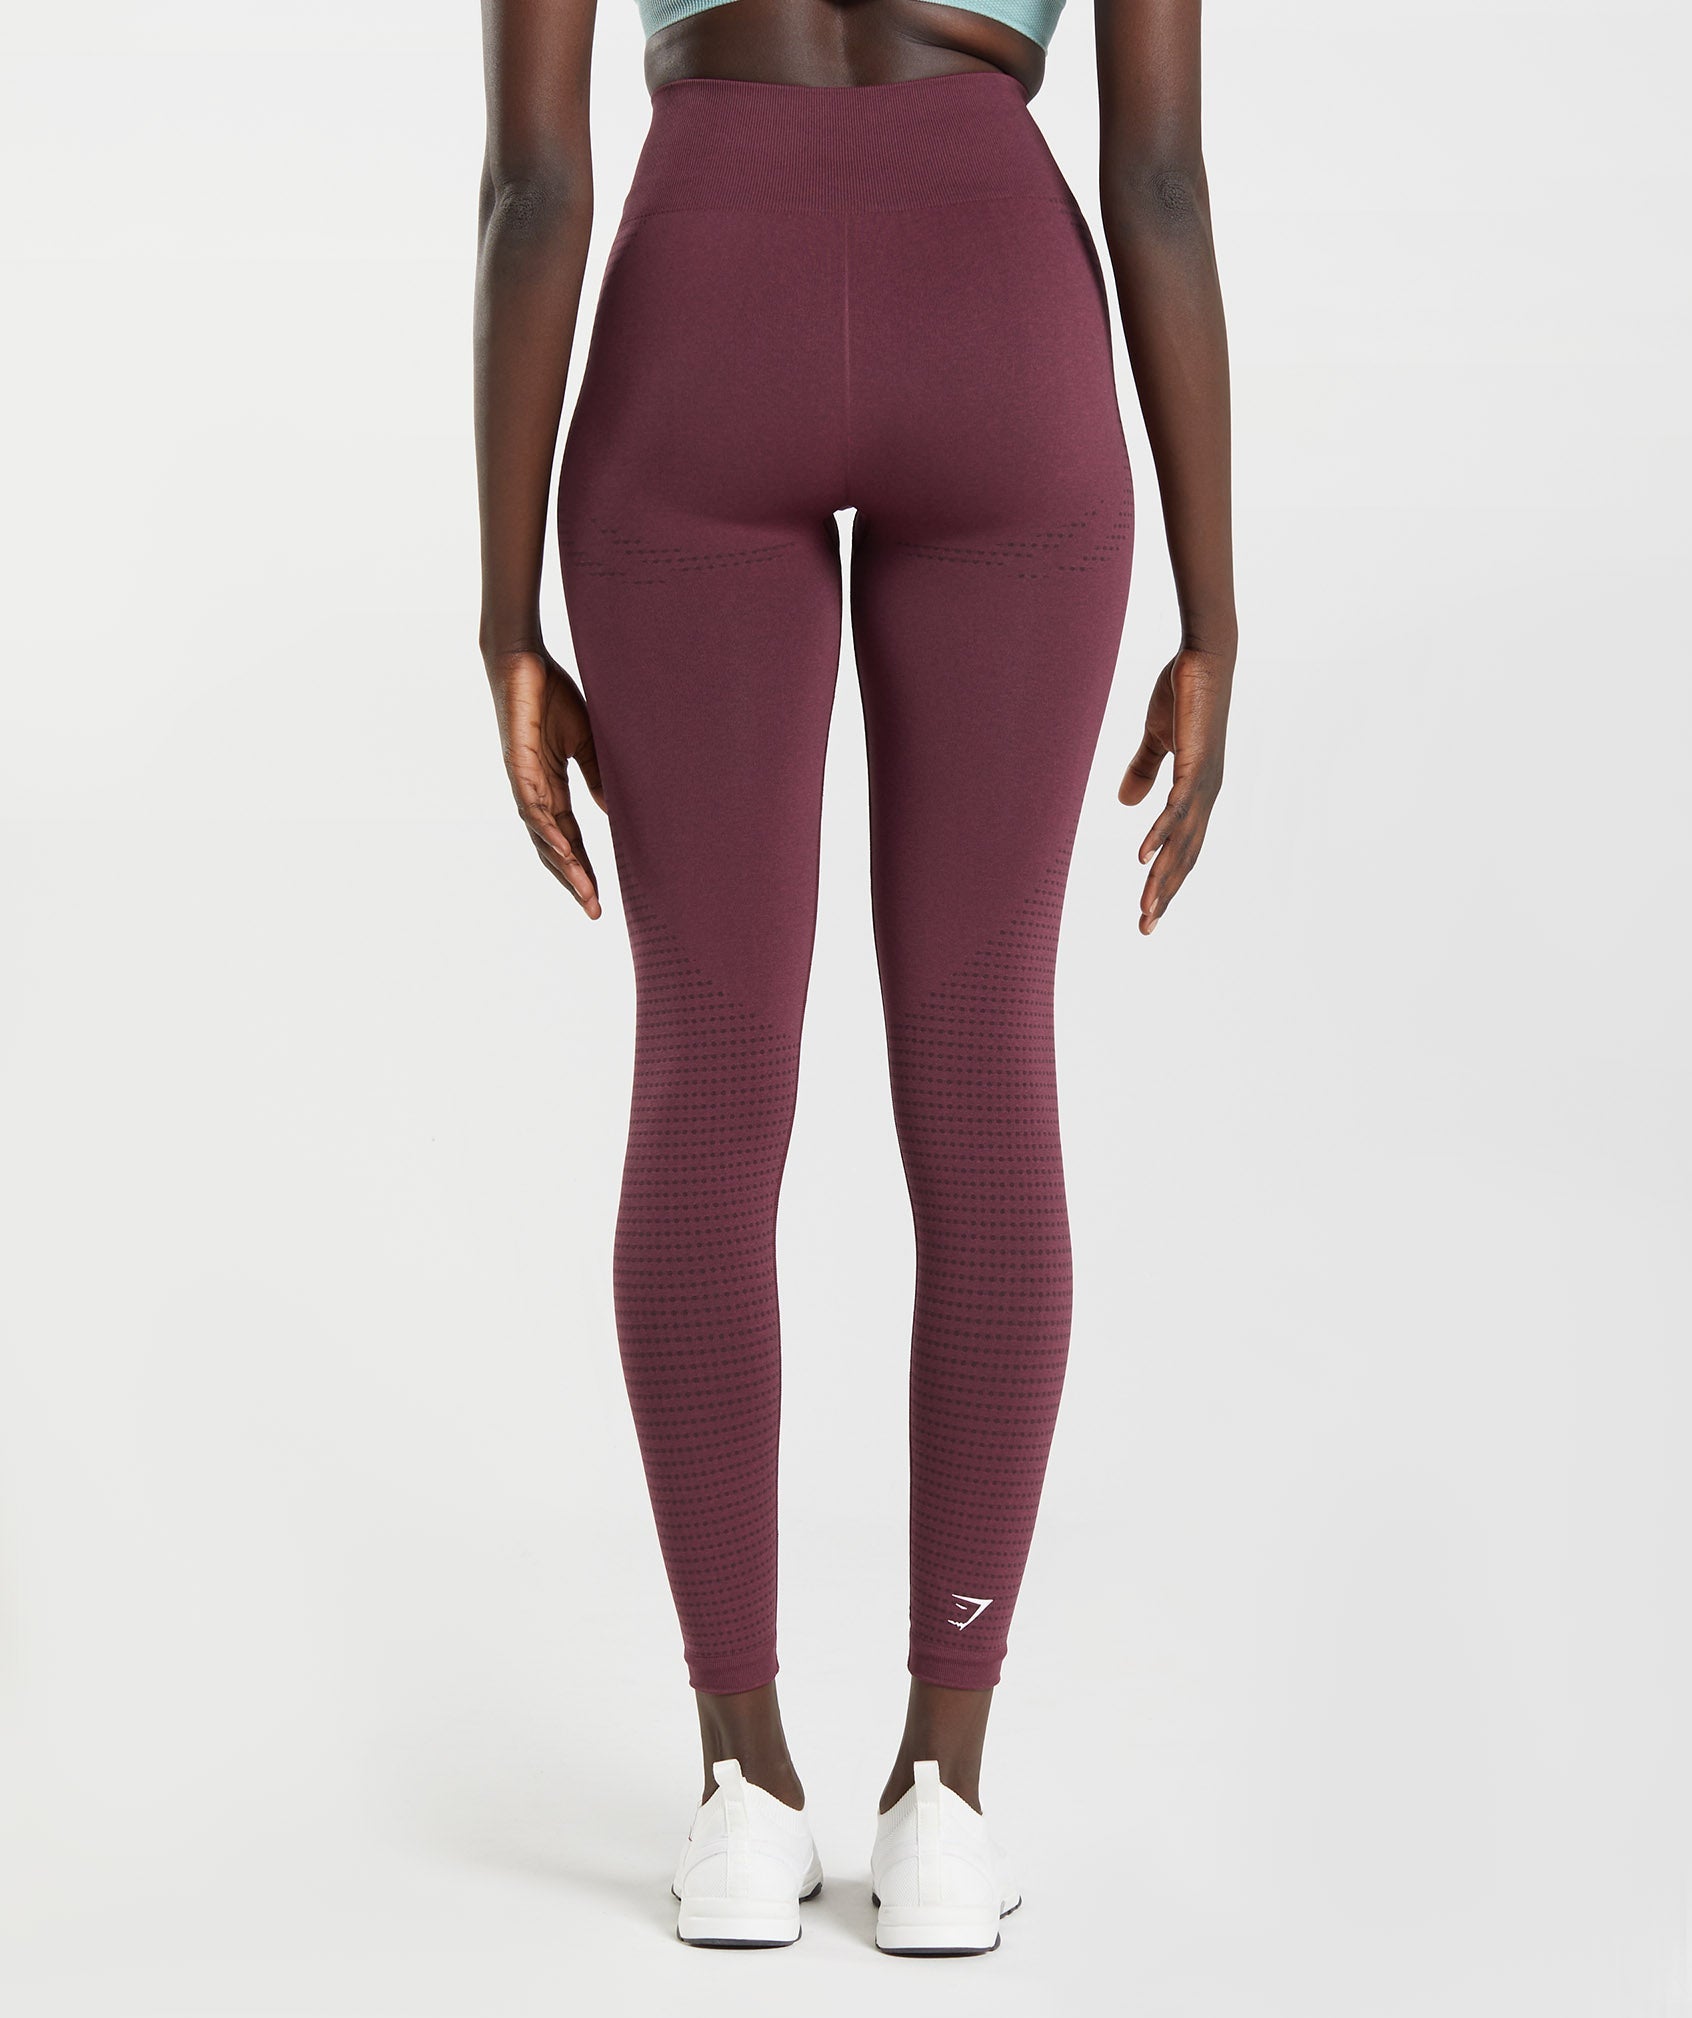 SOLD OUT bombshell sports wear leggings Thigh Highs Solid MAROON medium